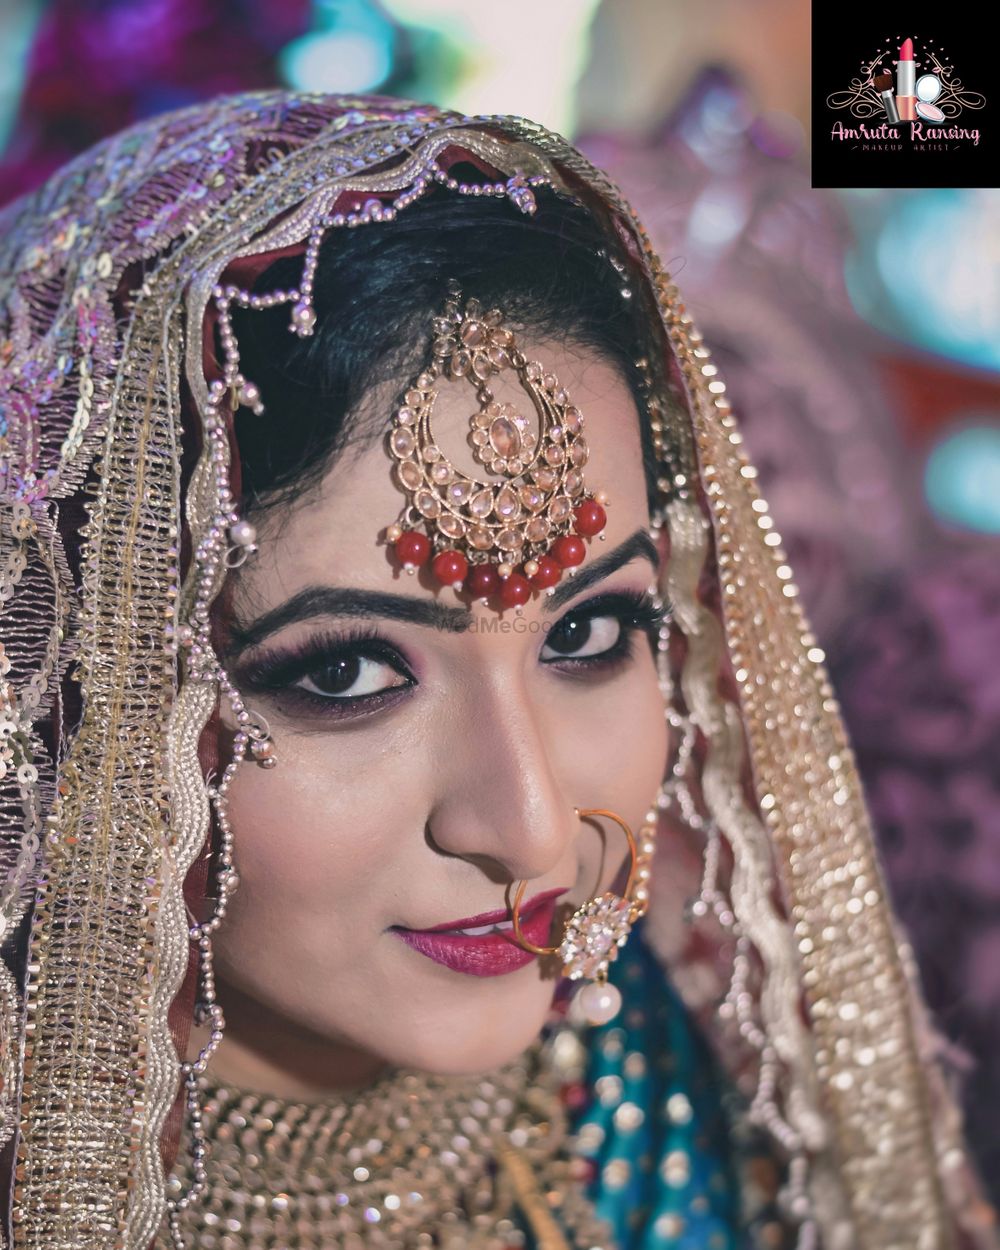 Photo From Brides - By Amruta Ransing Makeup Artist